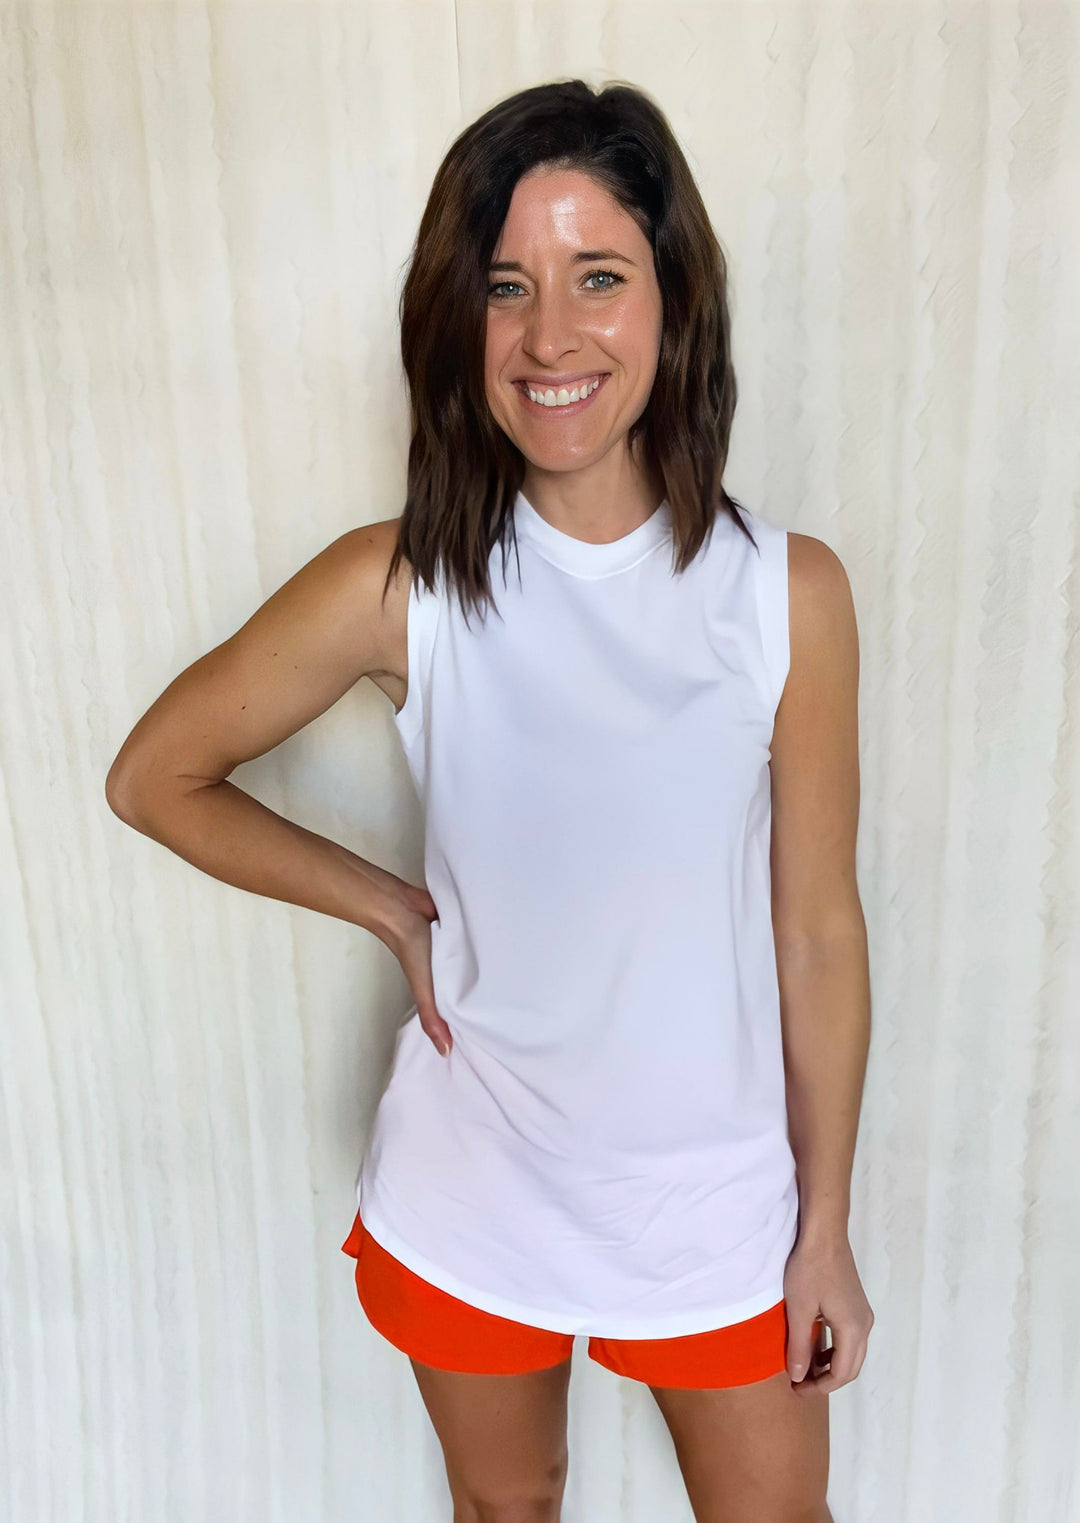 Women's White Tank Top paired with orange athleisure shorts.